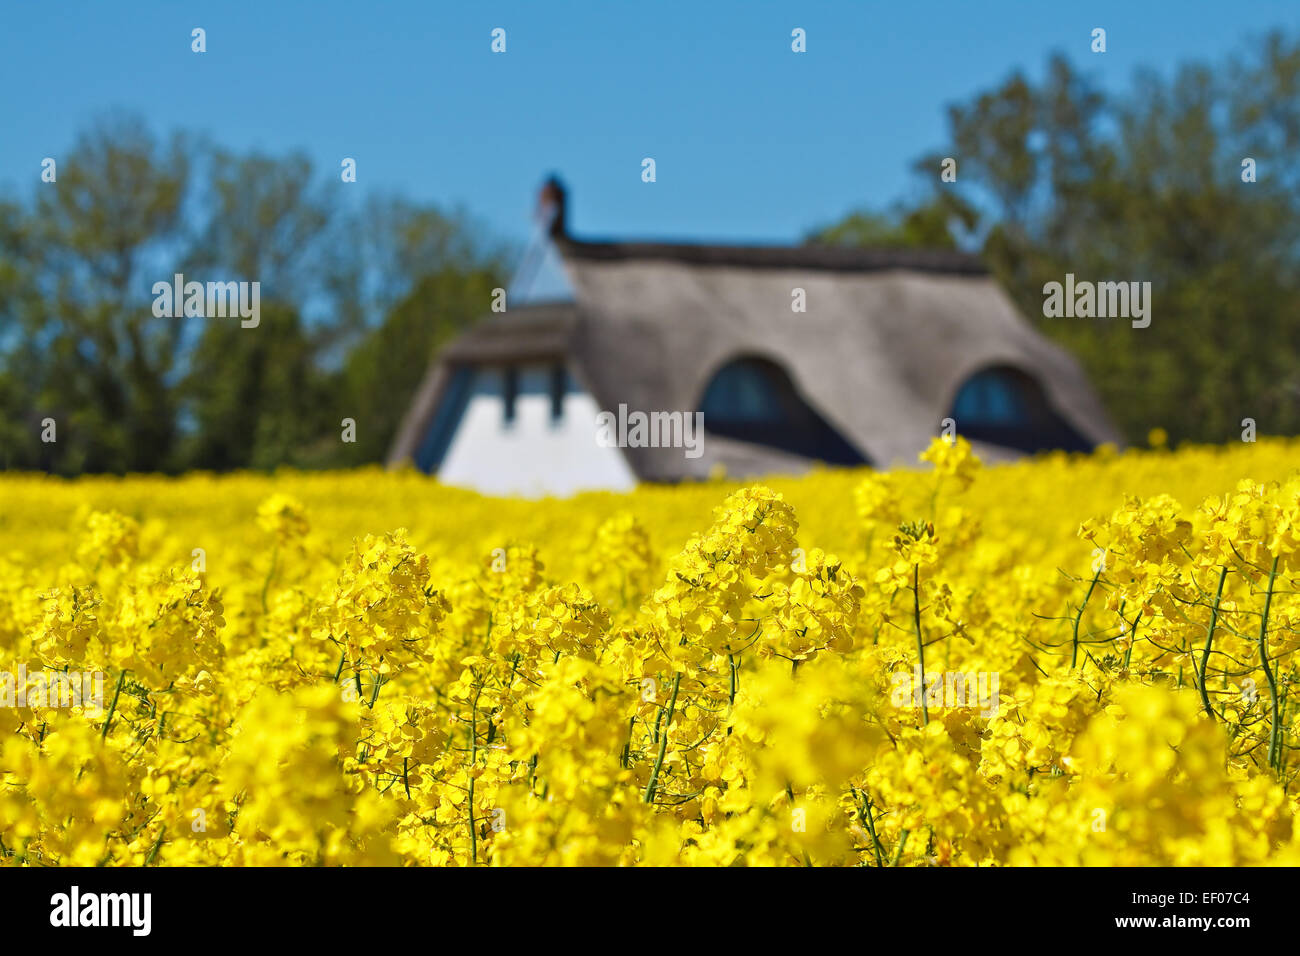 House on the edge of a rapeseed field Stock Photo